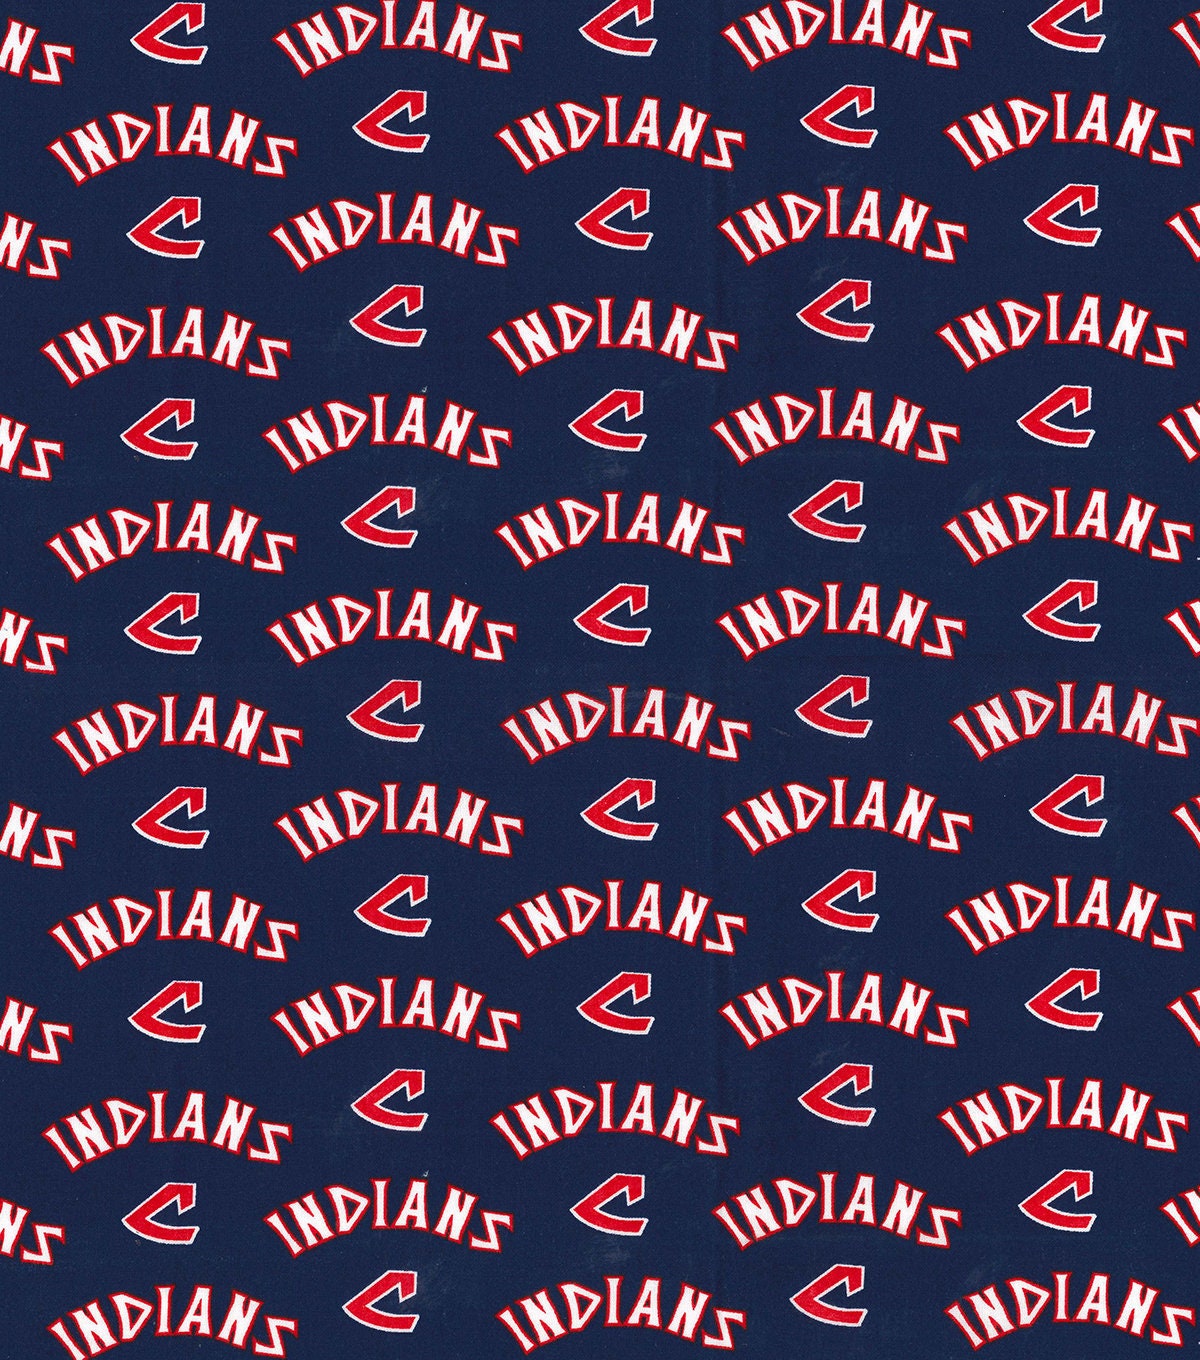 100+] Cleveland Indians Wallpapers